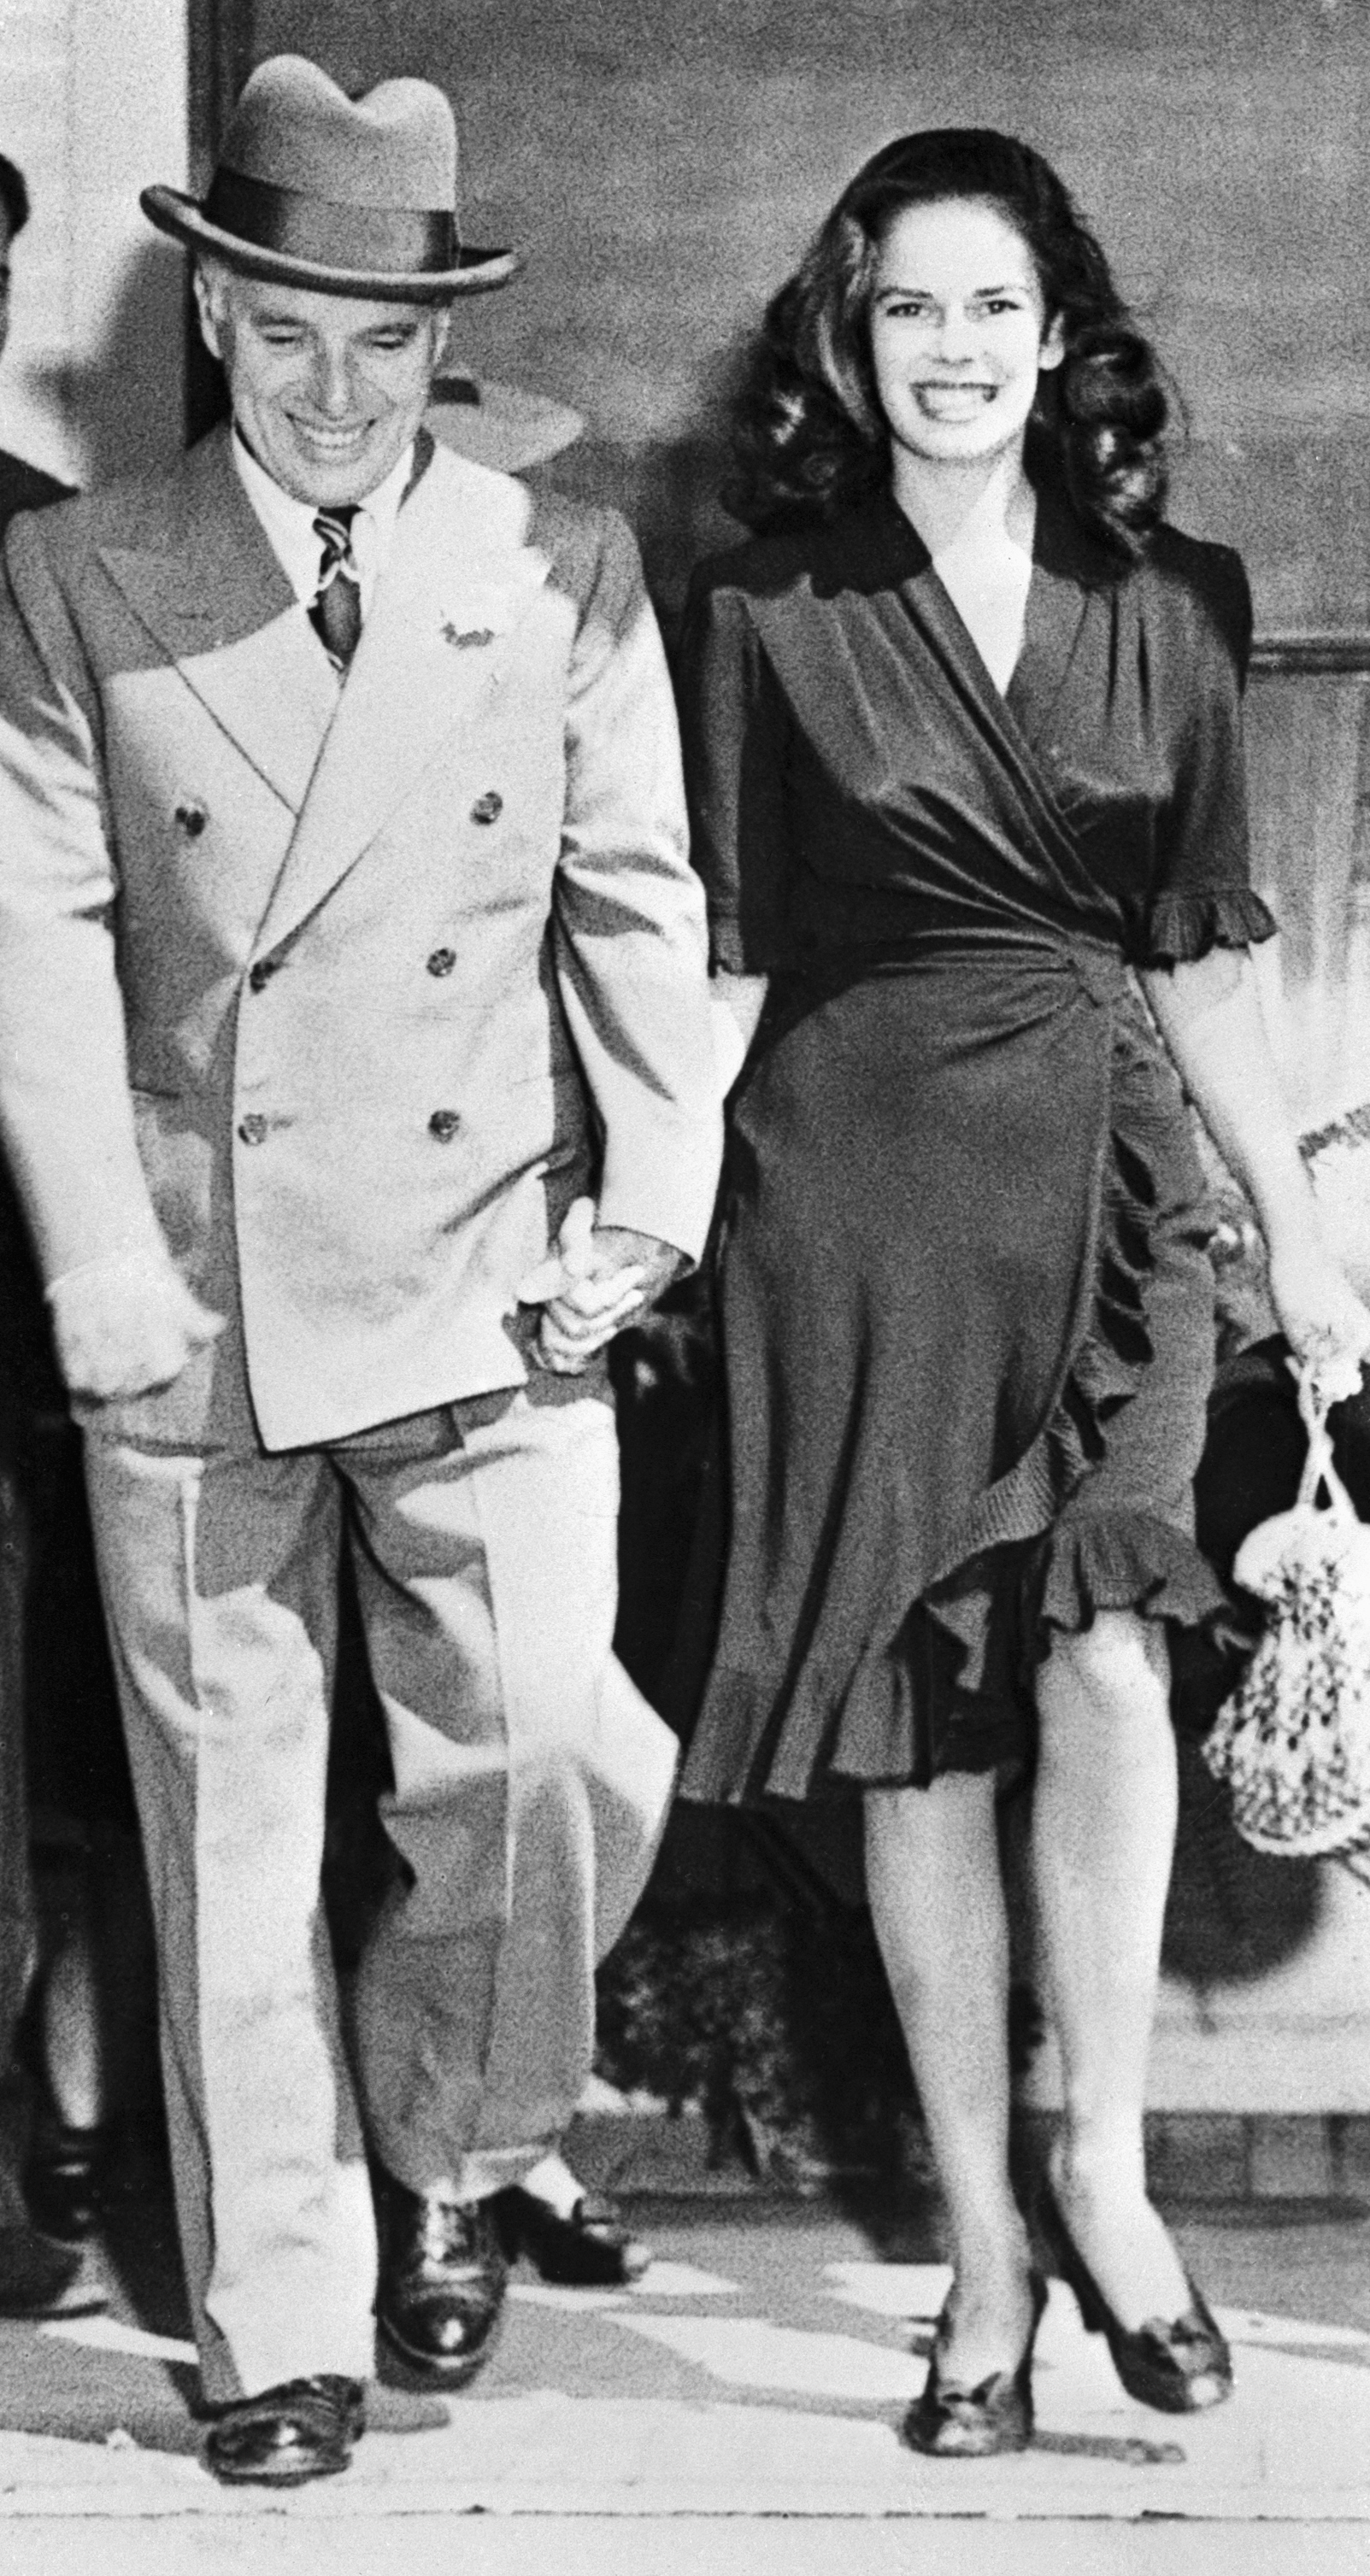 Charlie and Oona Chaplin after their wedding on June 17, 1943, in Carpinteria, California | Source: Getty Images